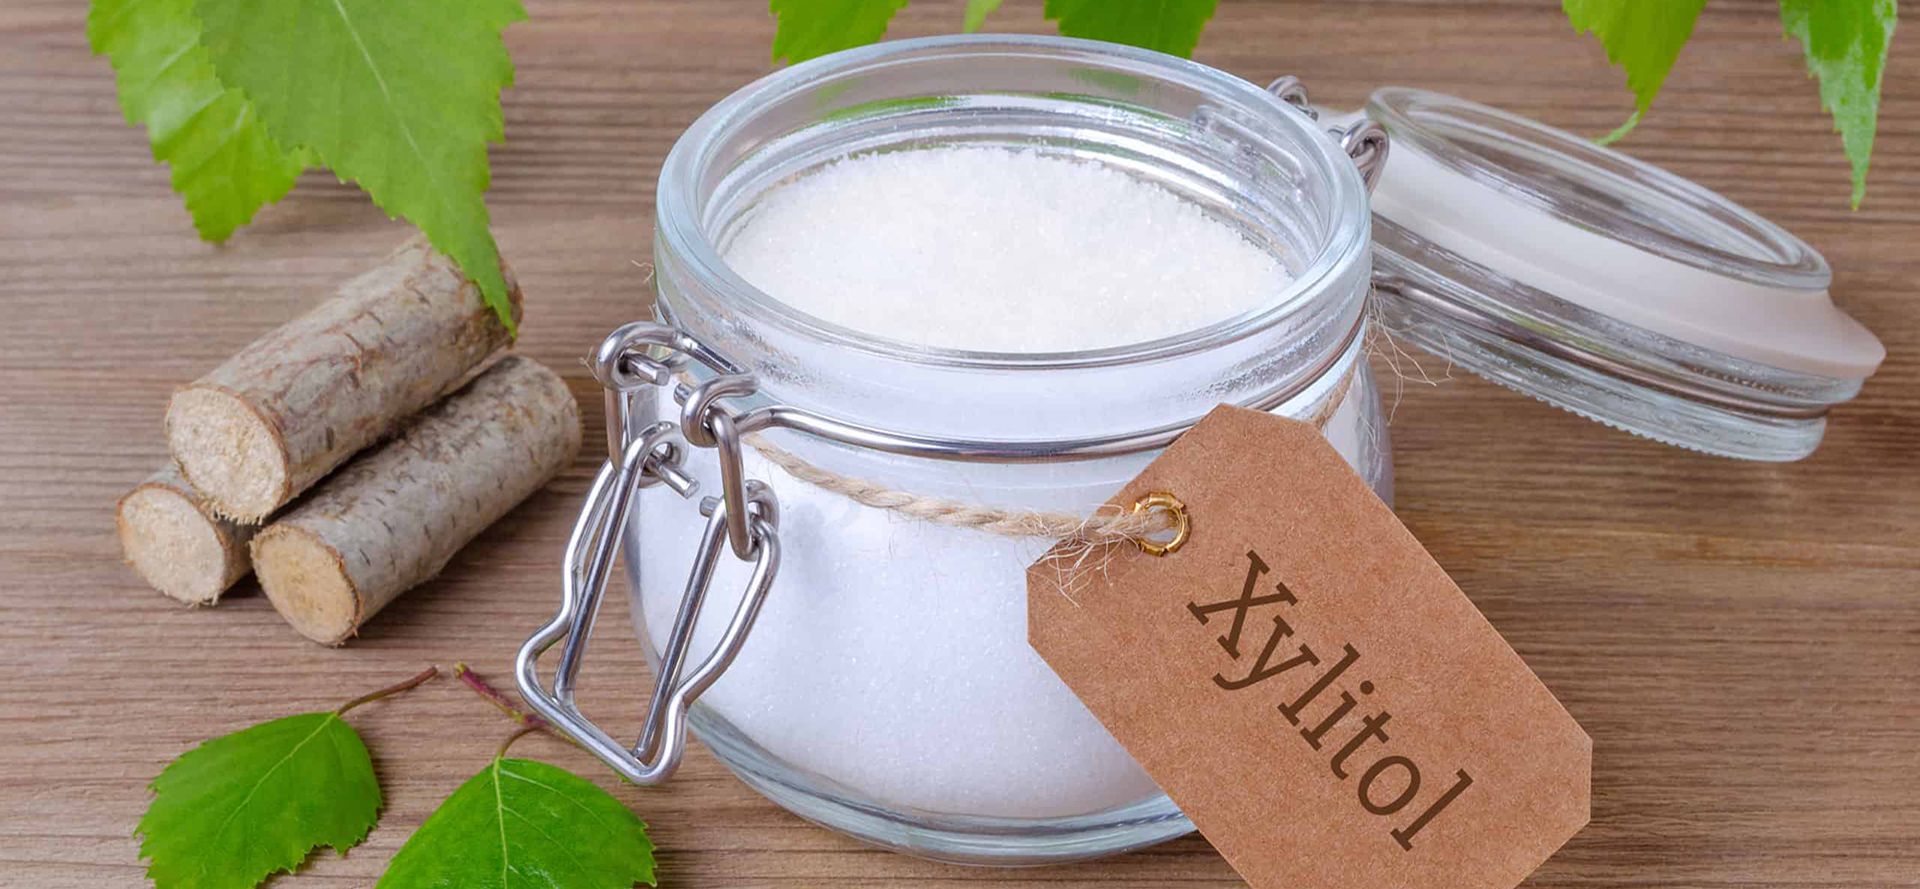 Types Of Sugar Alcohol Xylitol.